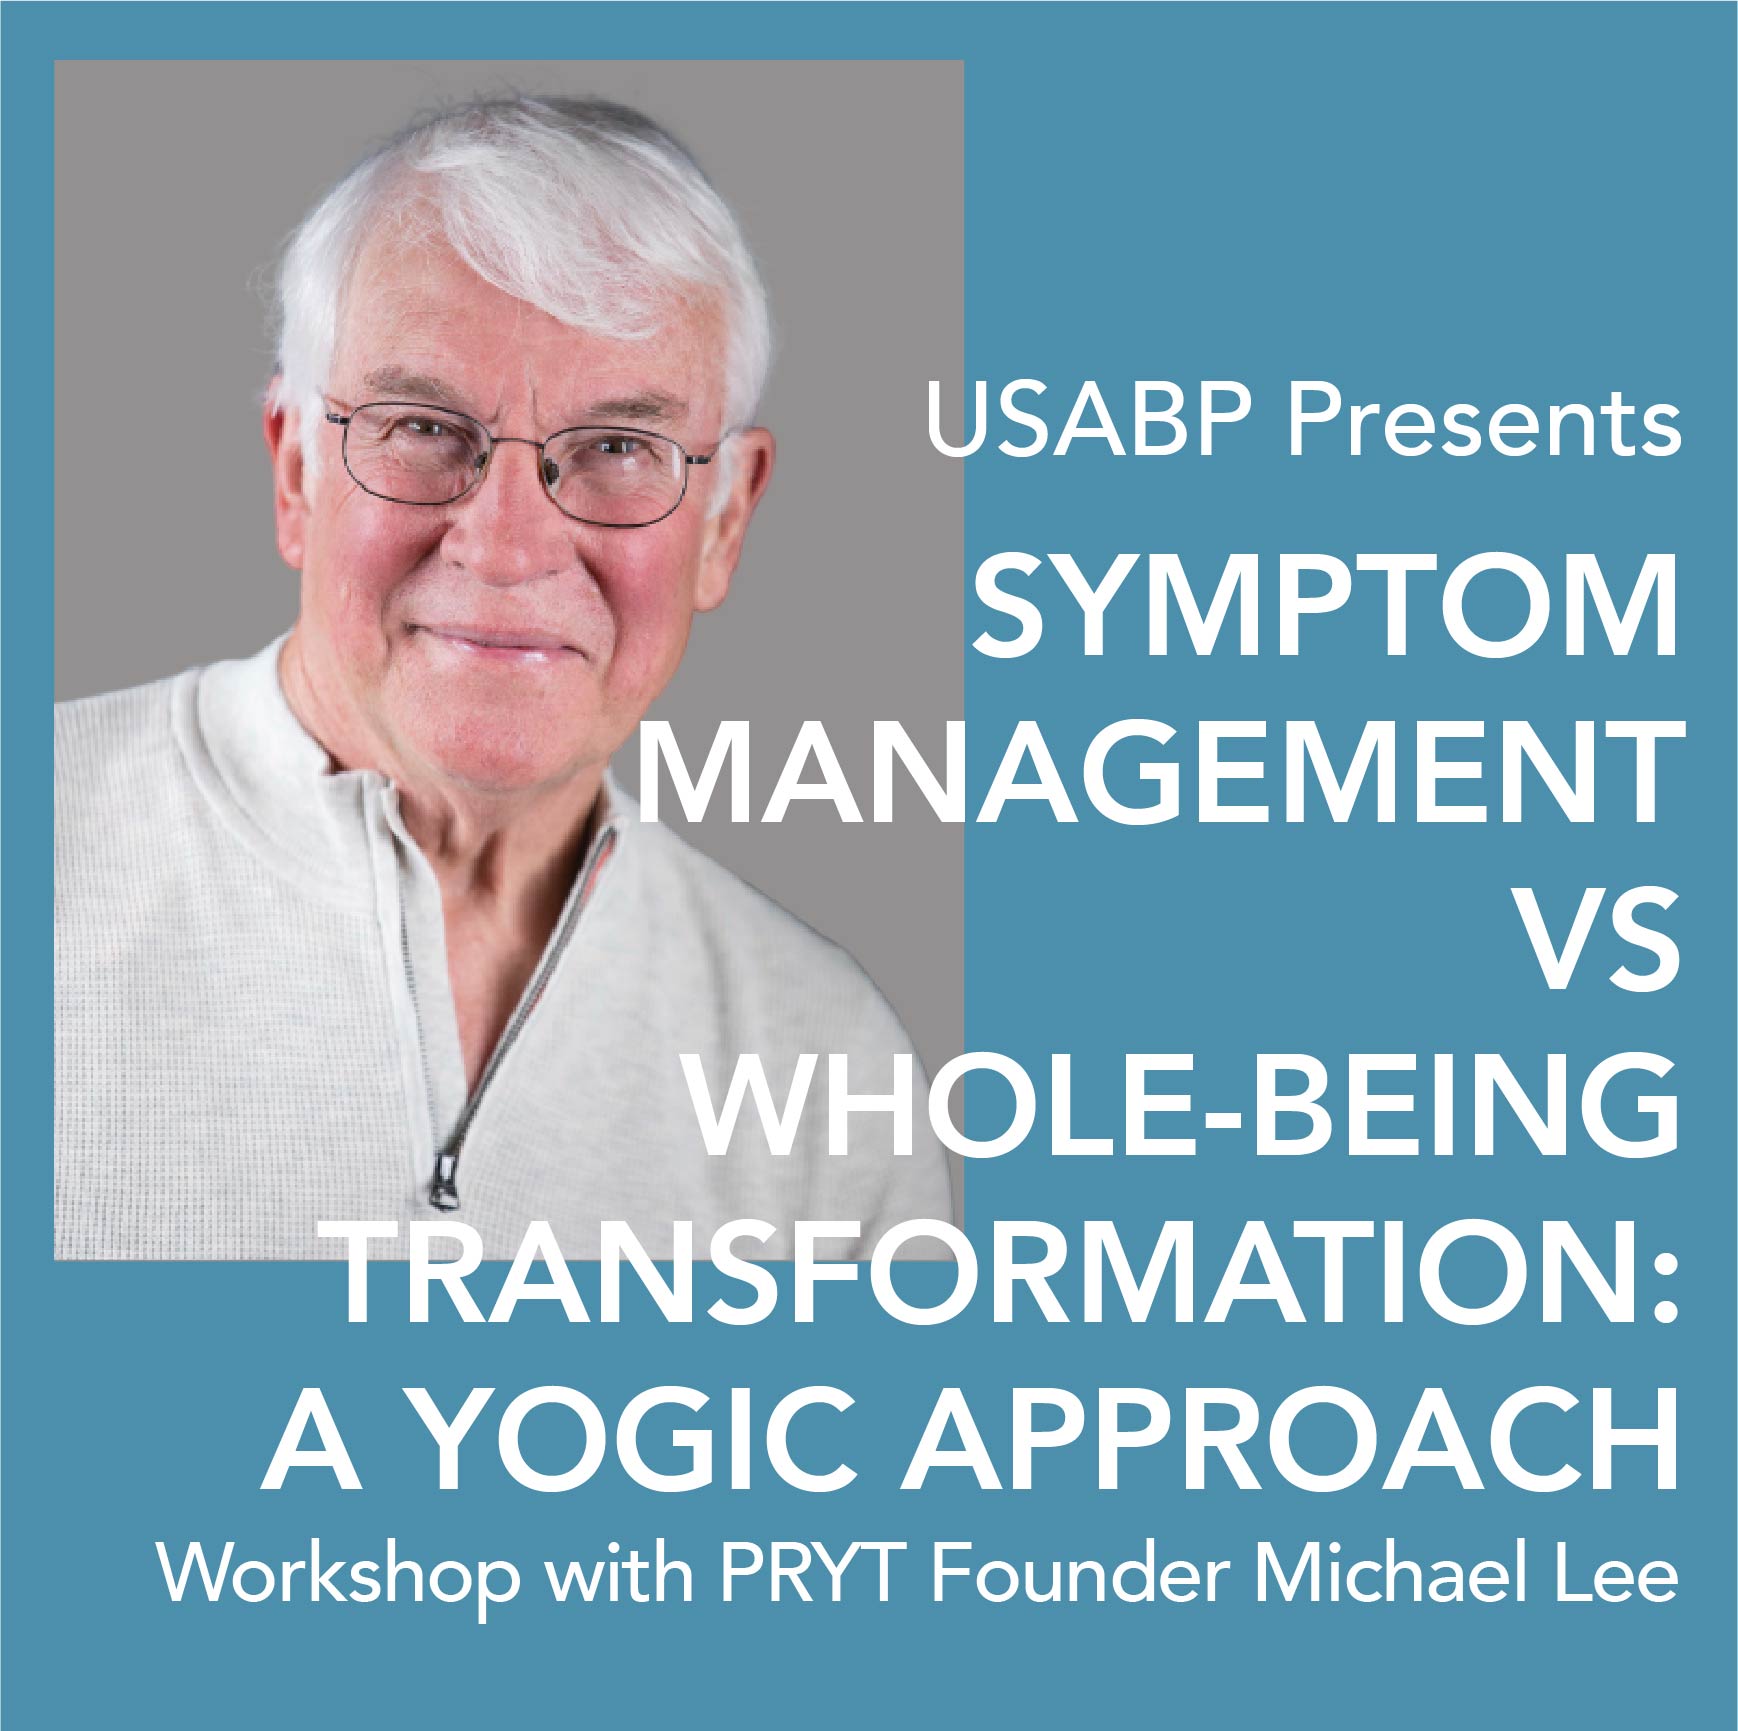 Online Yoga Therapy Workshop Symptom Management vs Whole-being Transformation